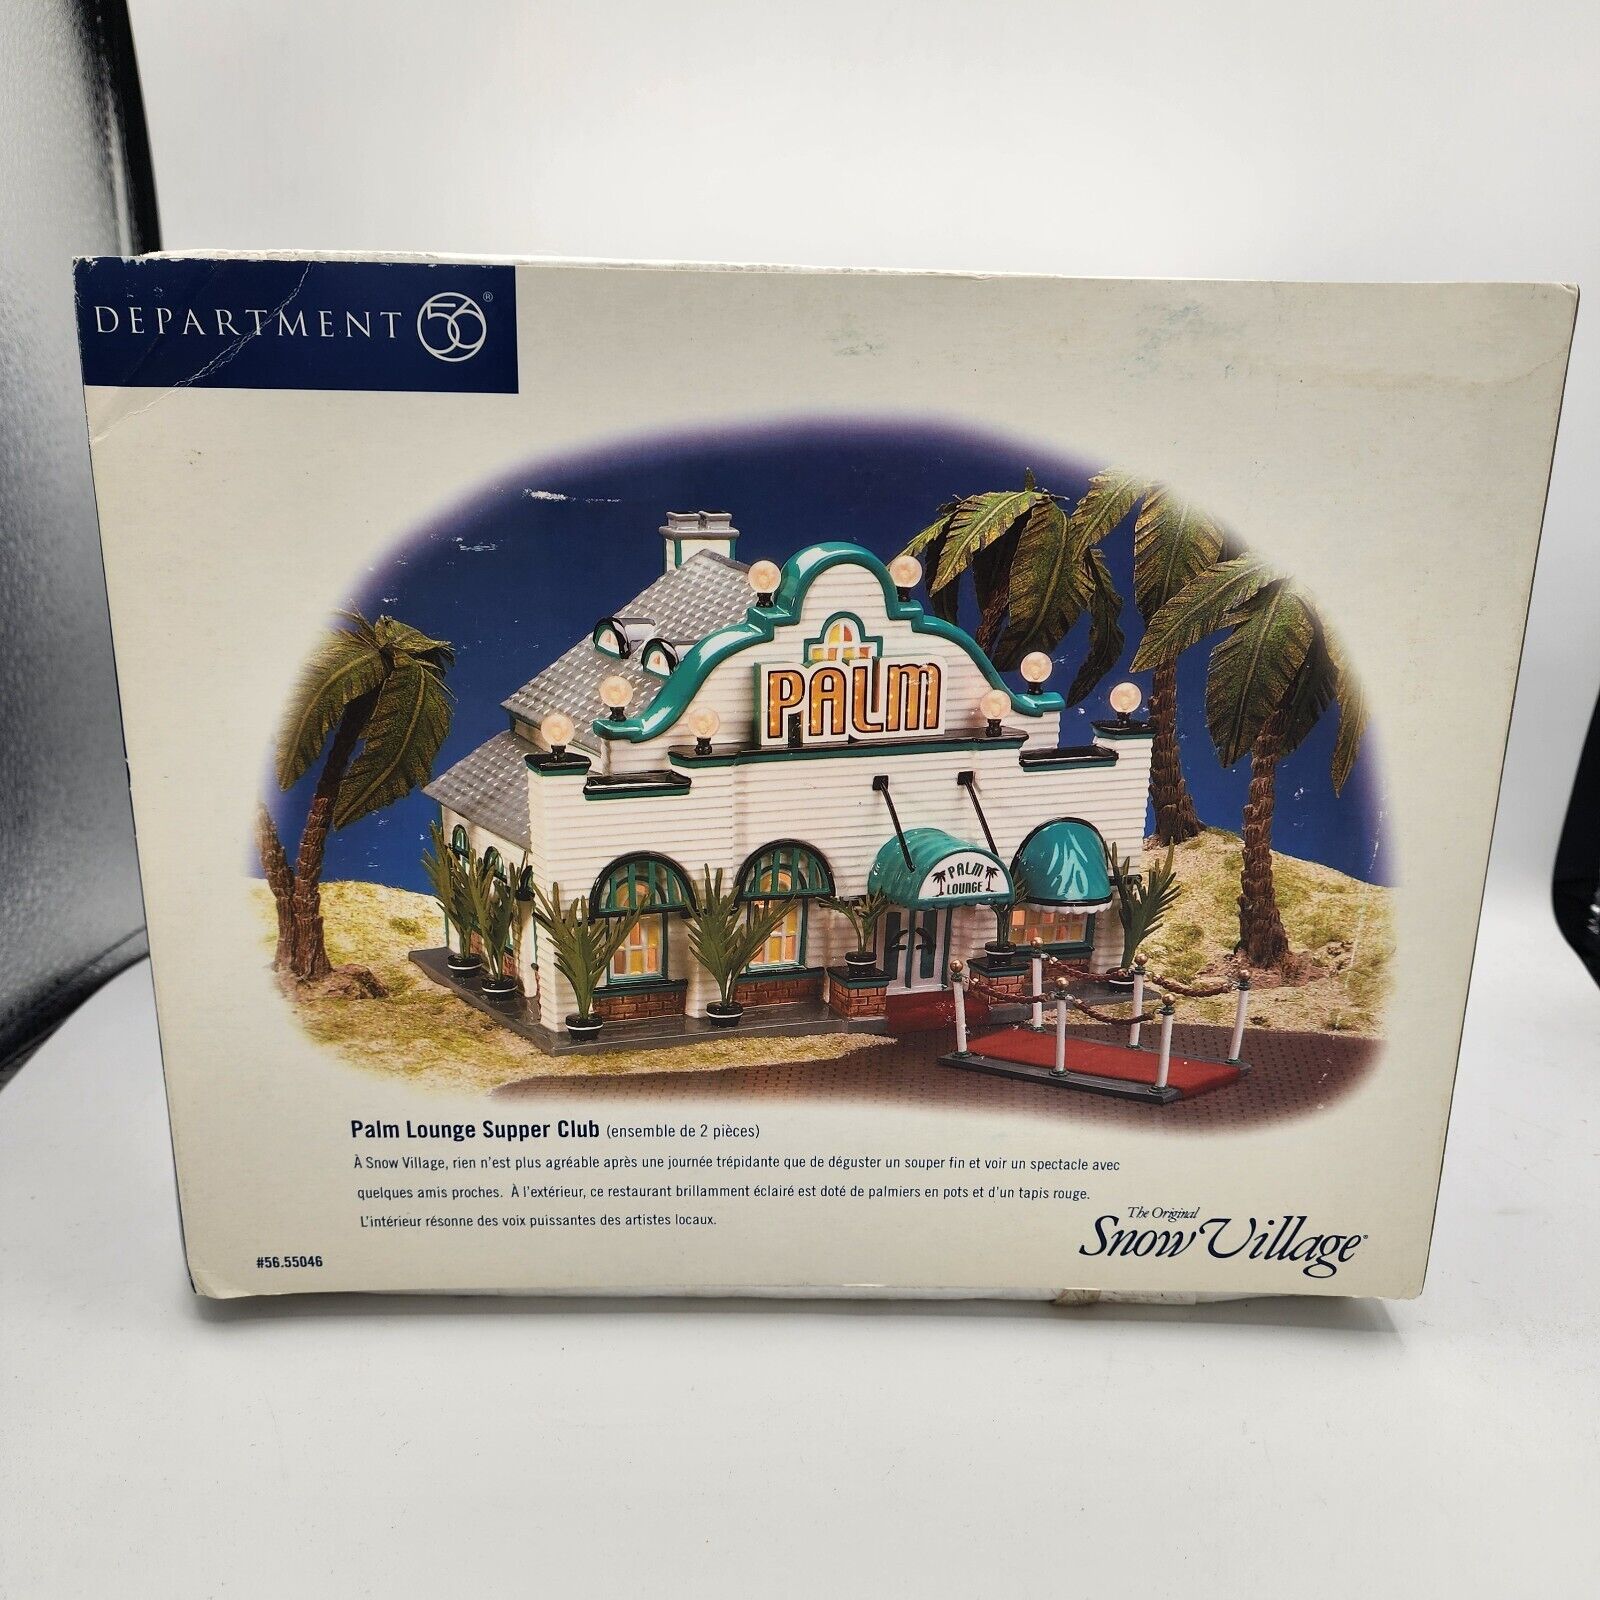 Dept 56 Snow Village Palm Lounge Supper Club #56.55046 Retired From 2000